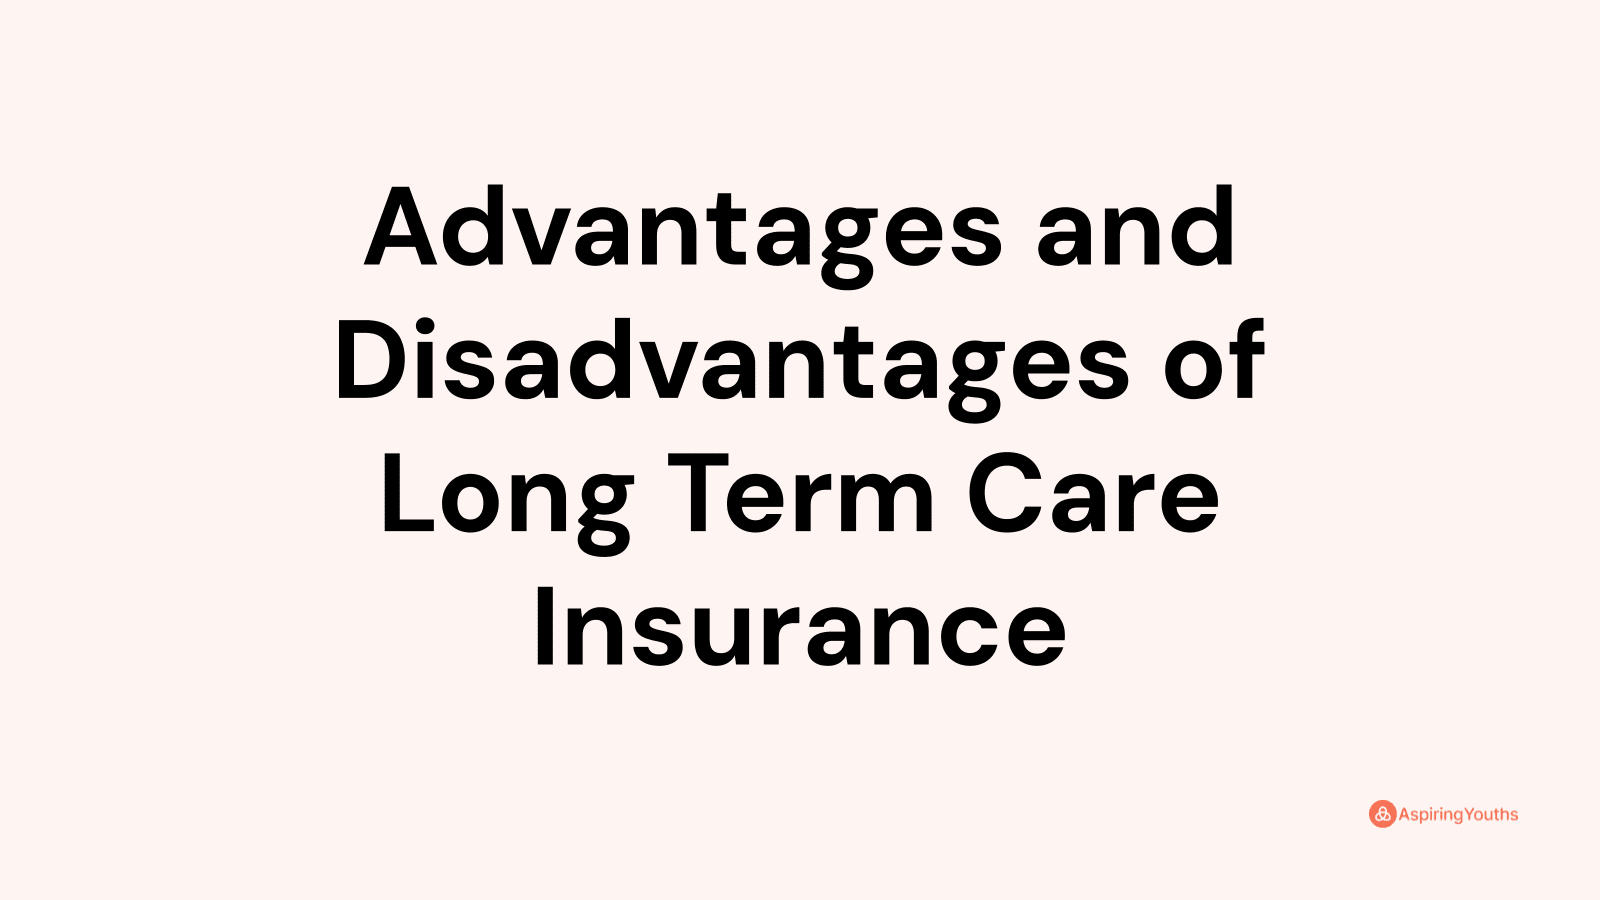 Advantages and disadvantages of Long Term Care Insurance